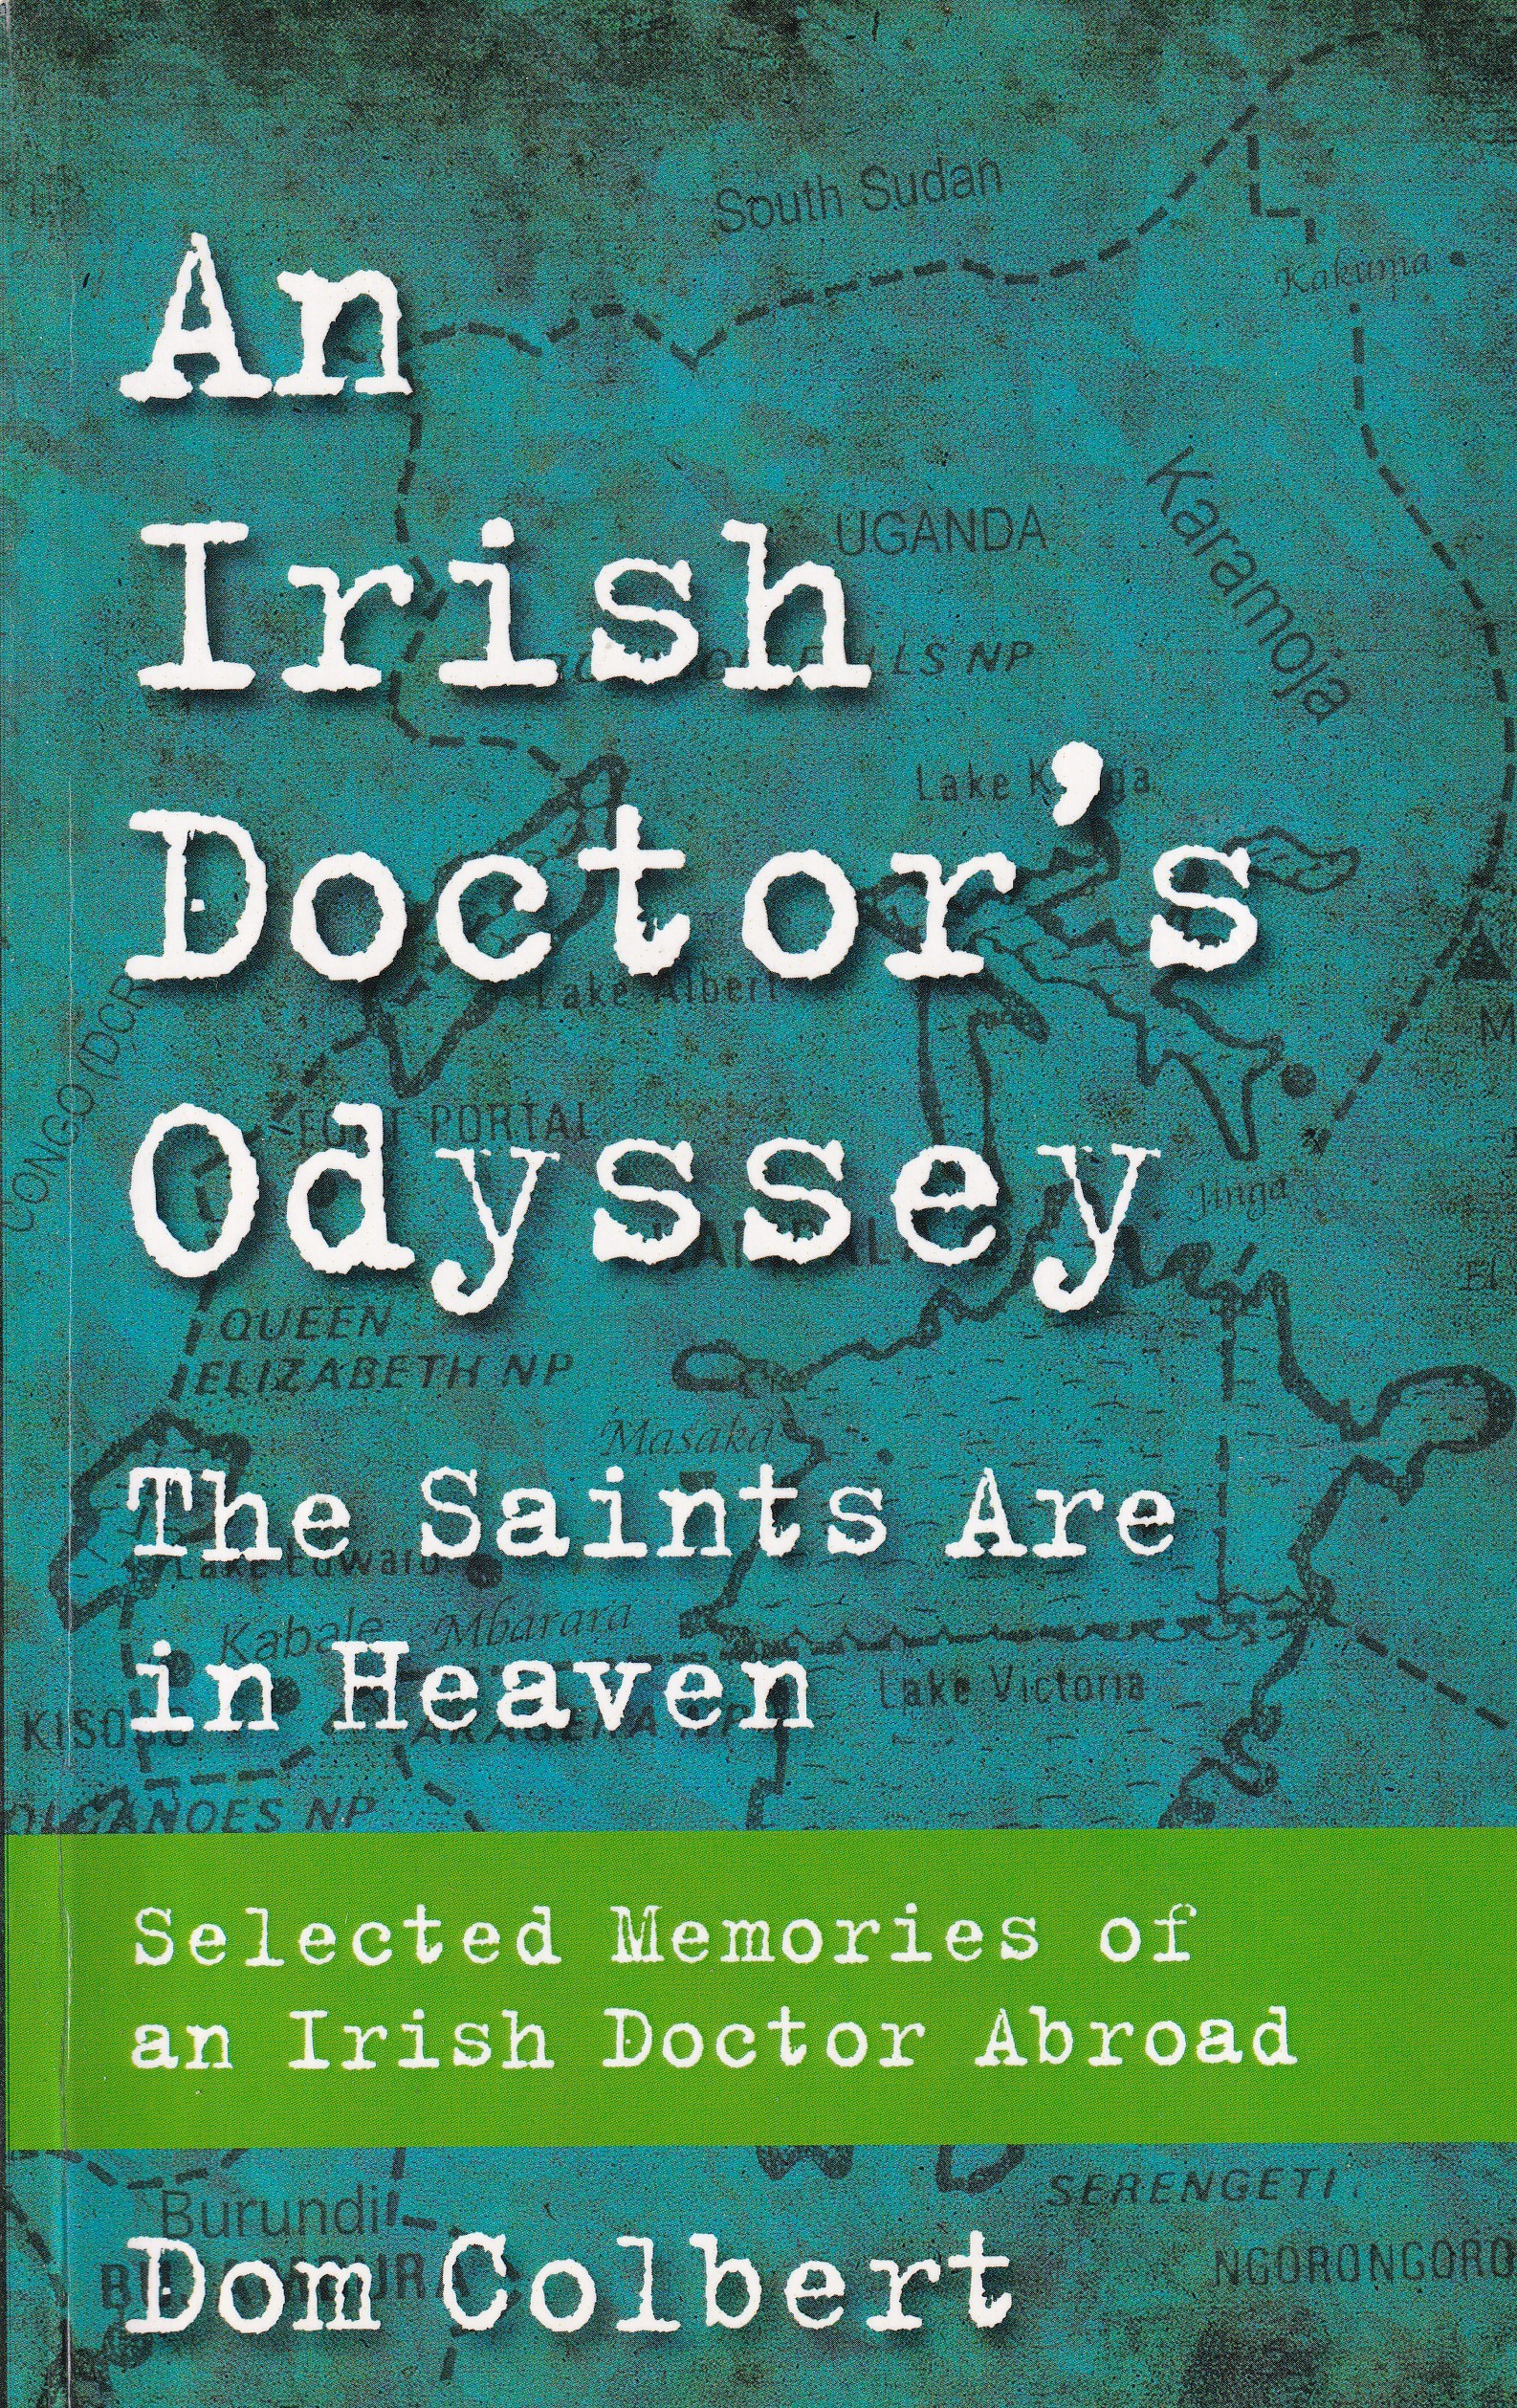 An Irish Doctor’s Odyssey: The Saints are in Heaven, Selected Memories of an Irish Doctor Abroad by Dom Colbert